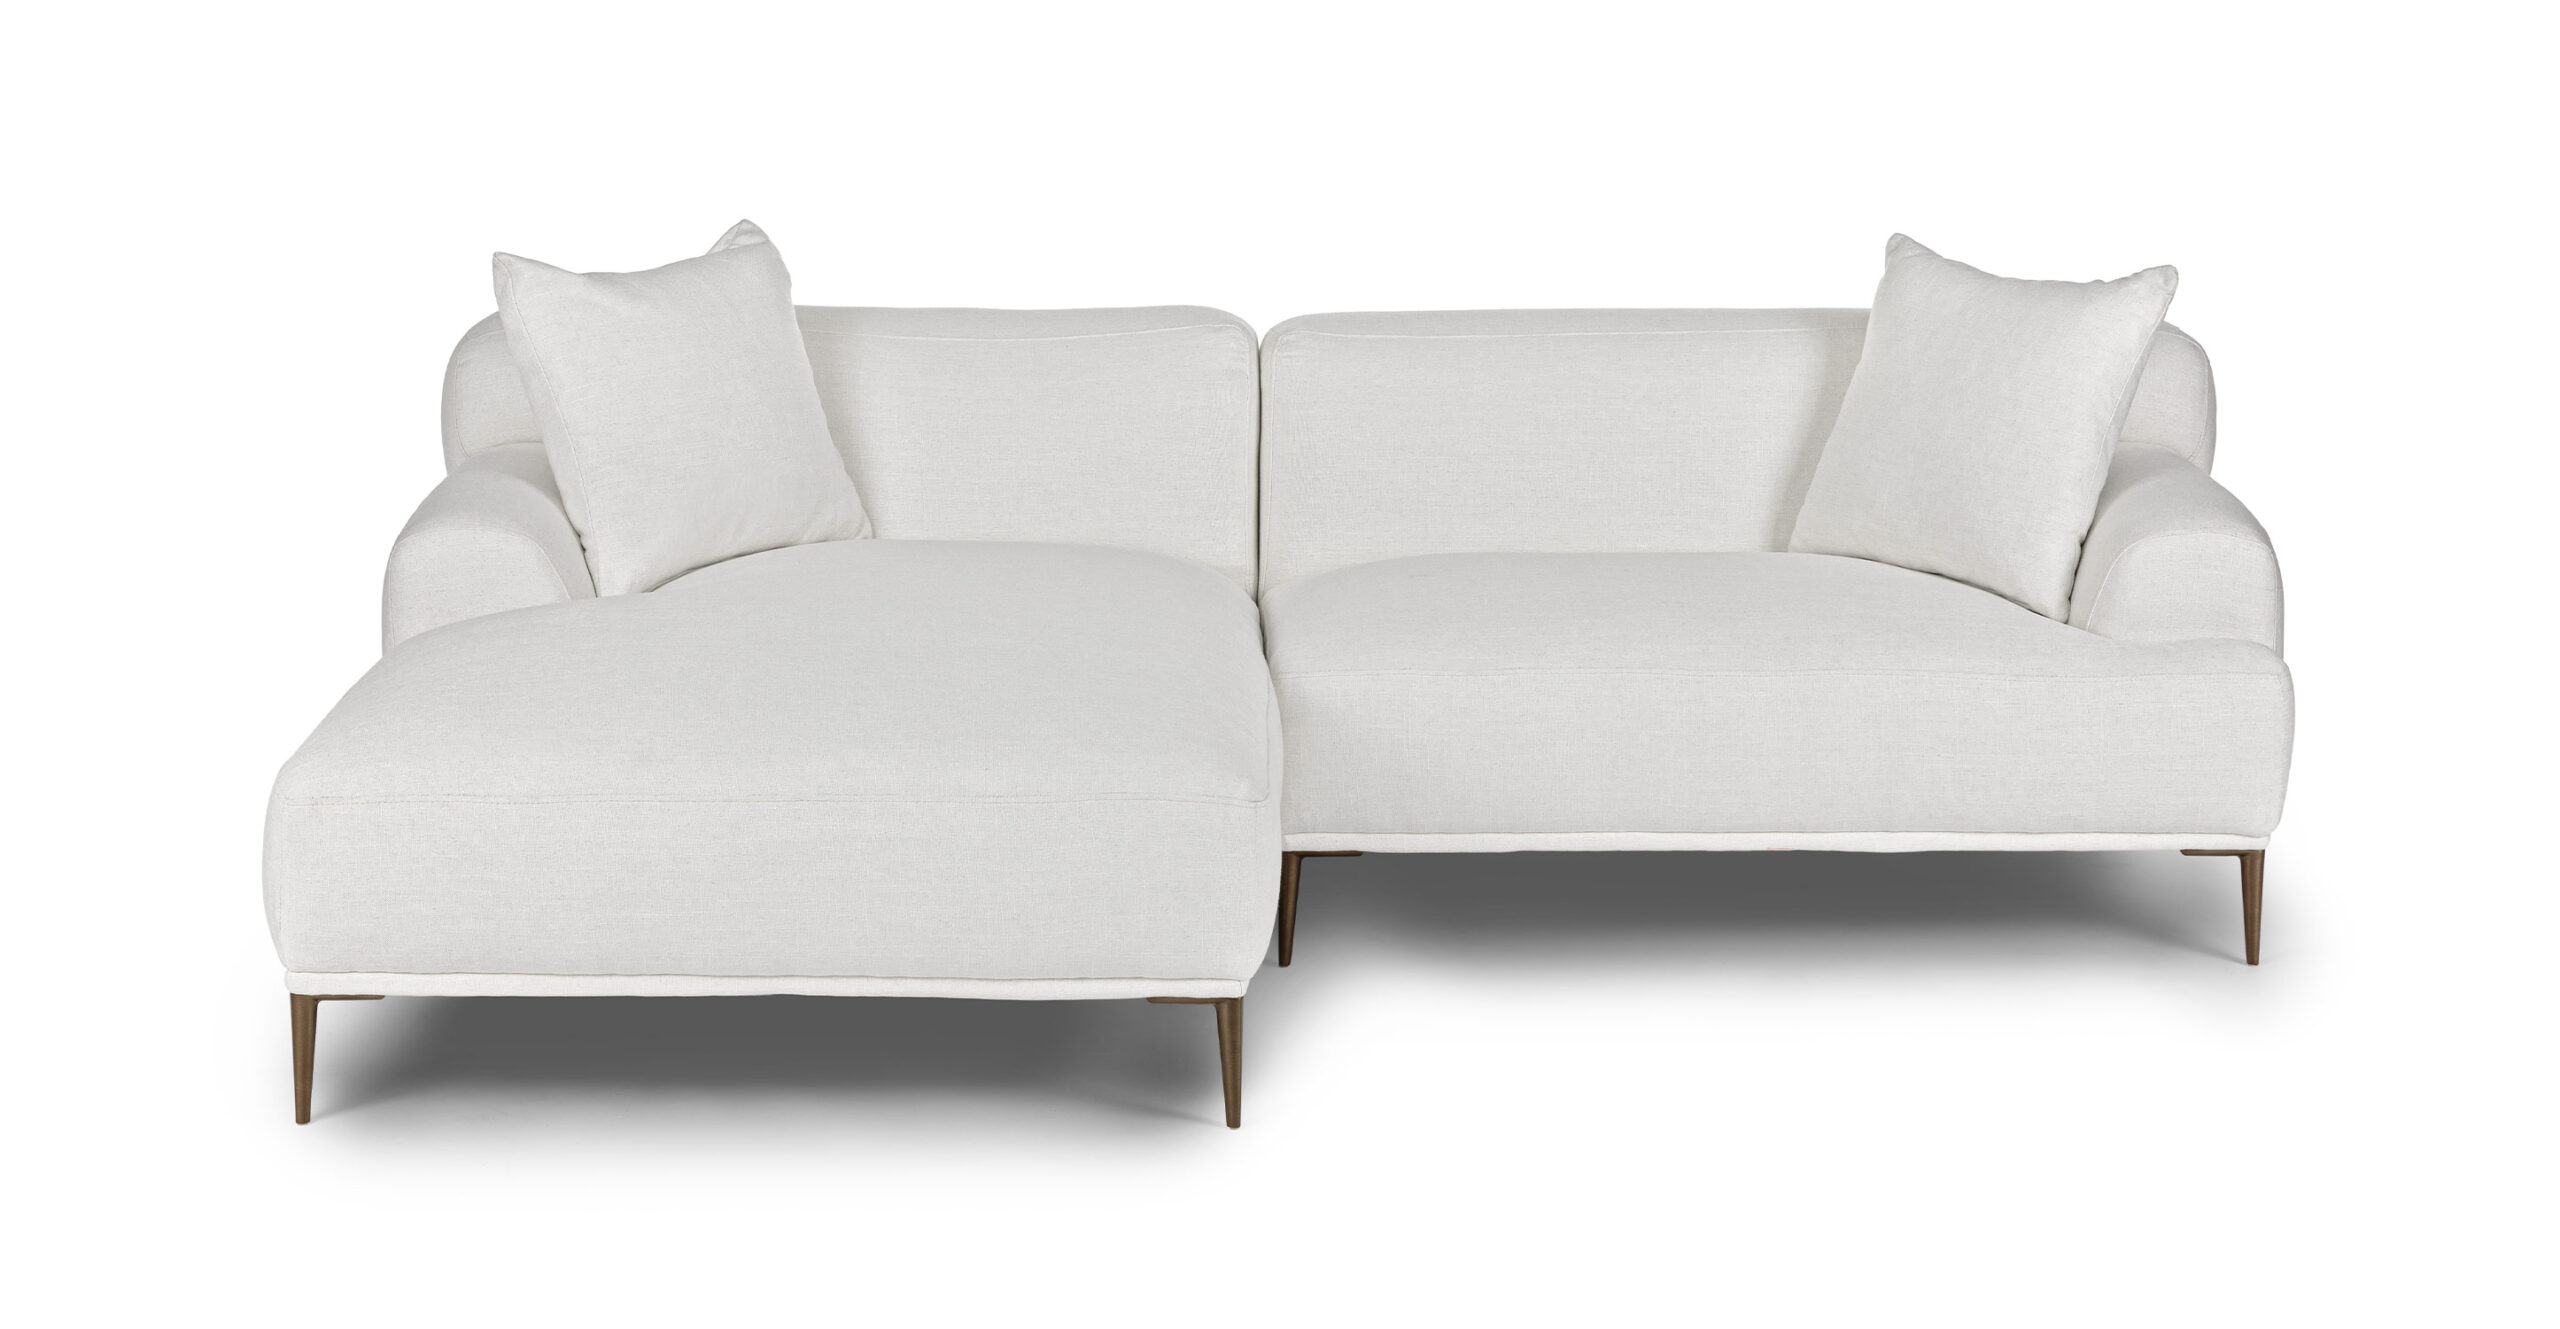 Article Abisko Sectional